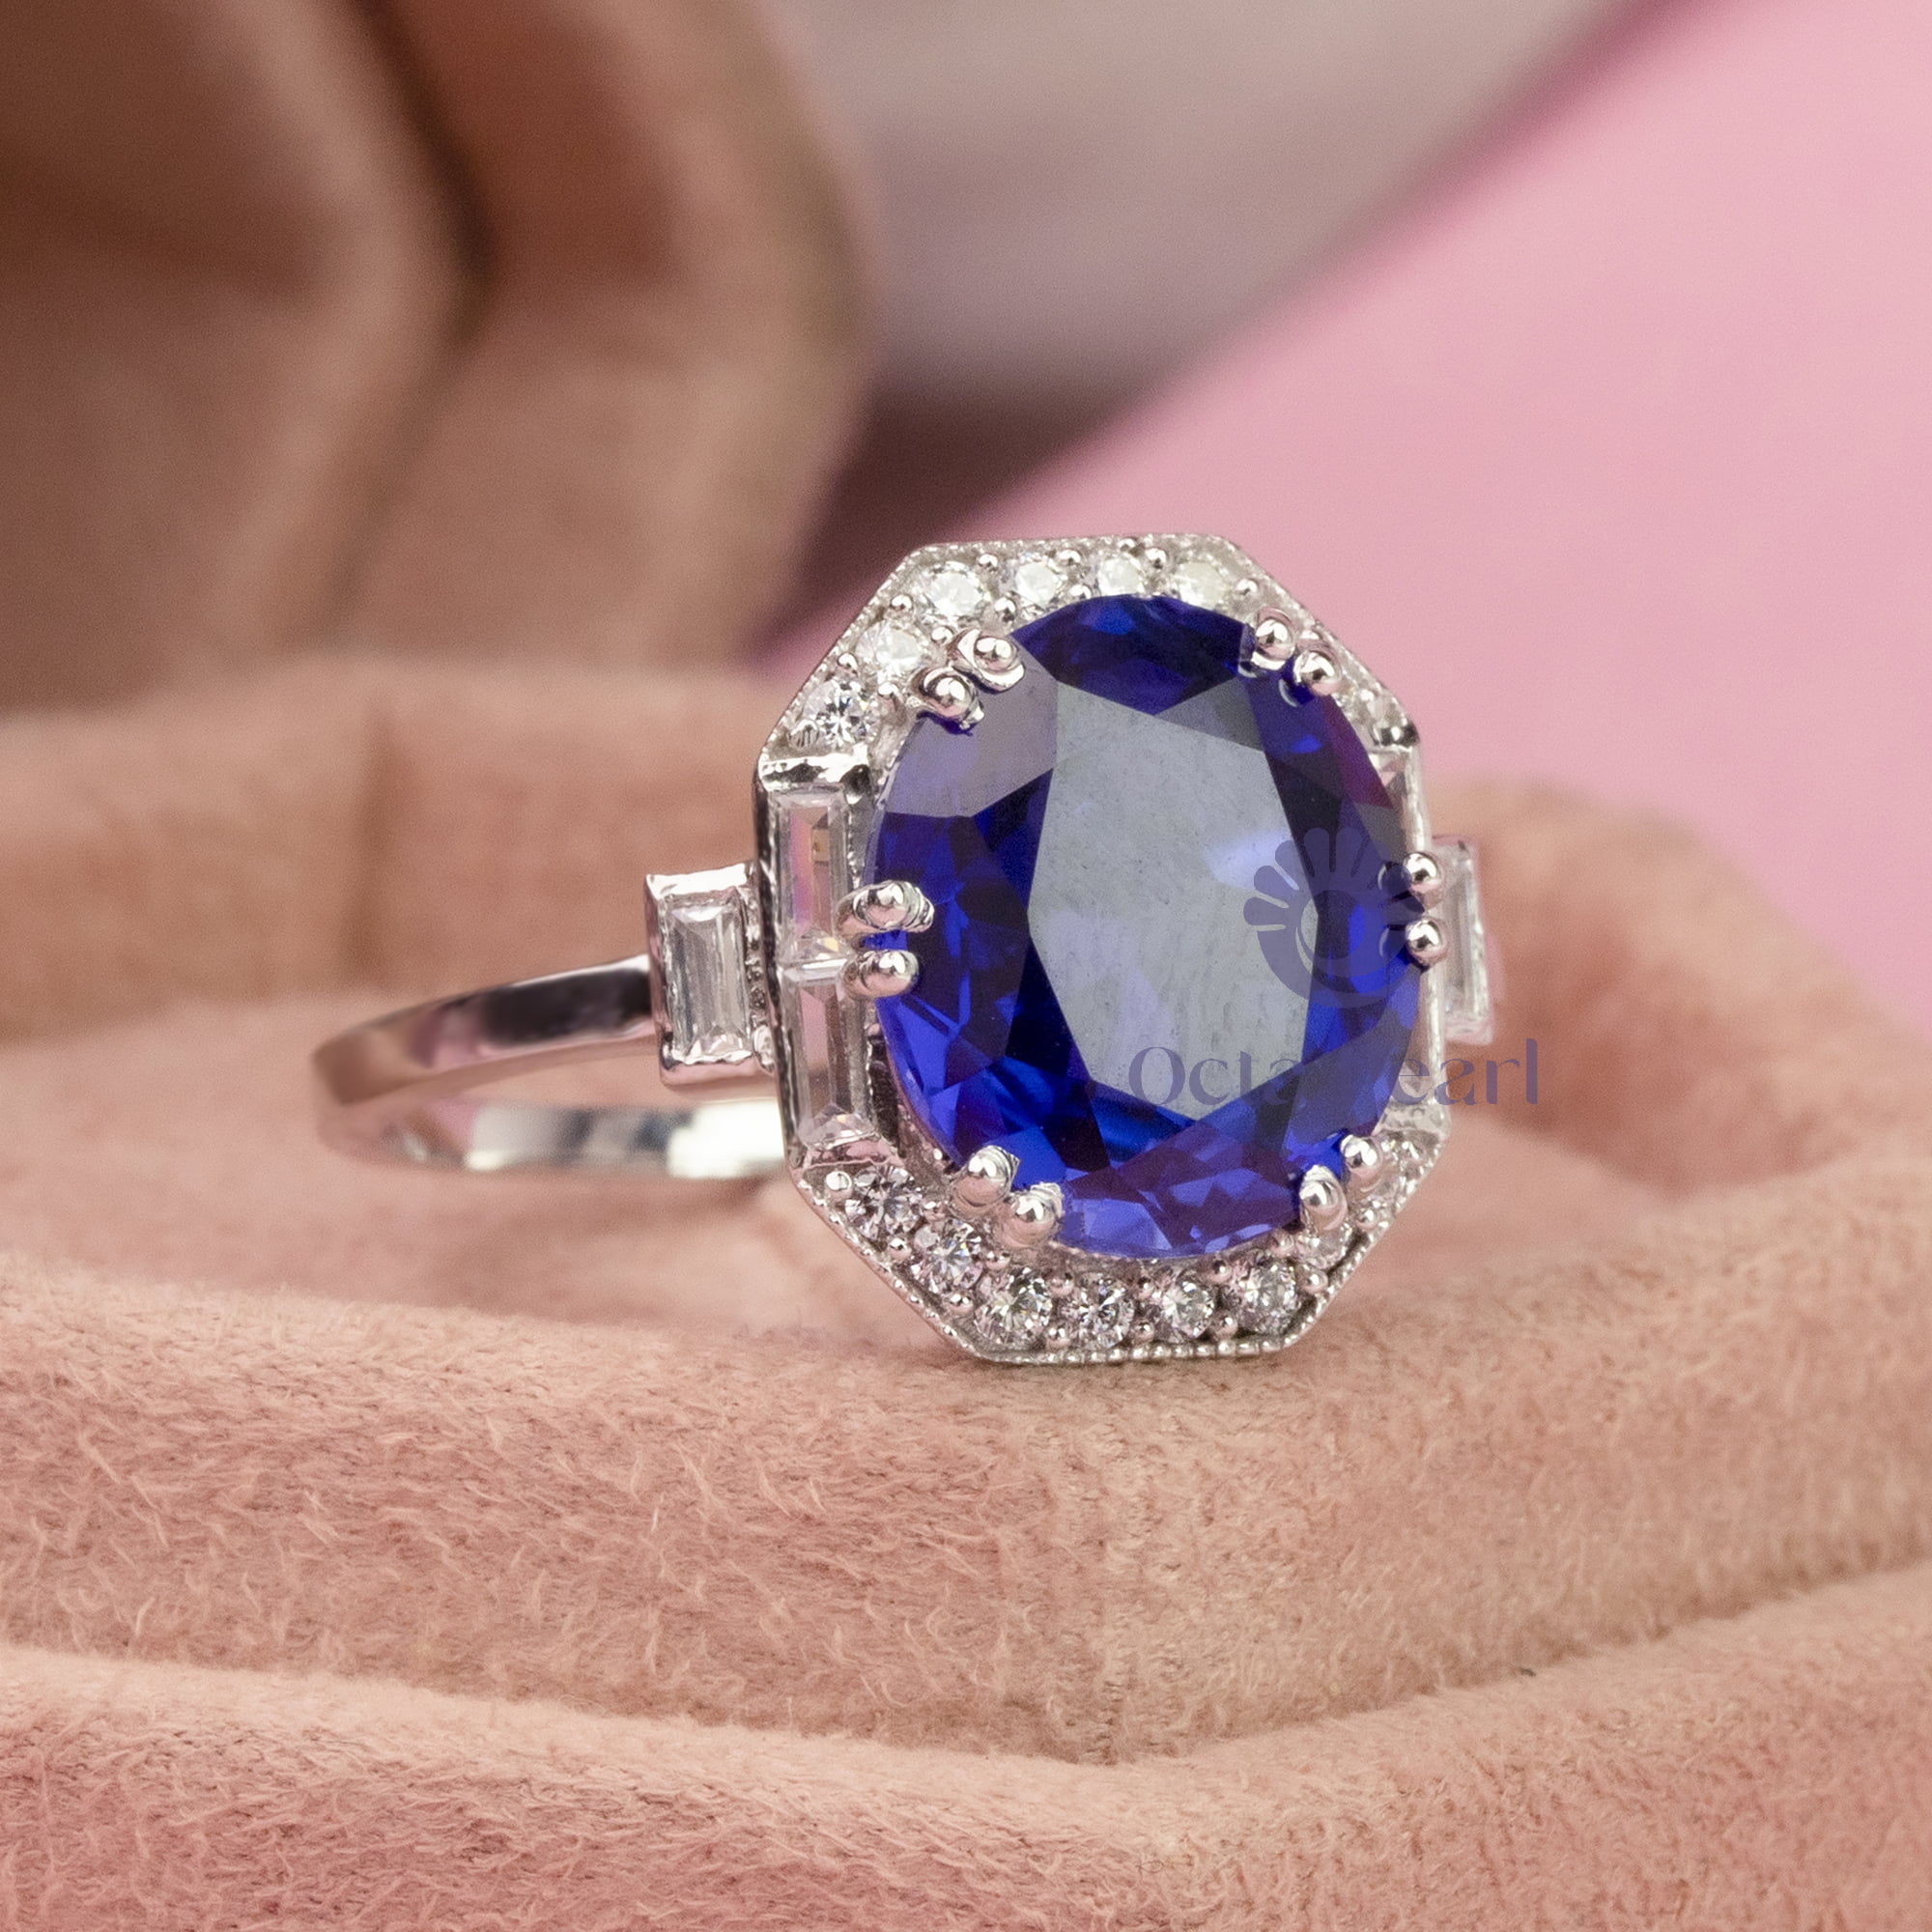 Gorgeous Sapphire Blue Oval With Baguette And Round Cut CZ Stone Art Deco Ring (5 2/3 TCW)